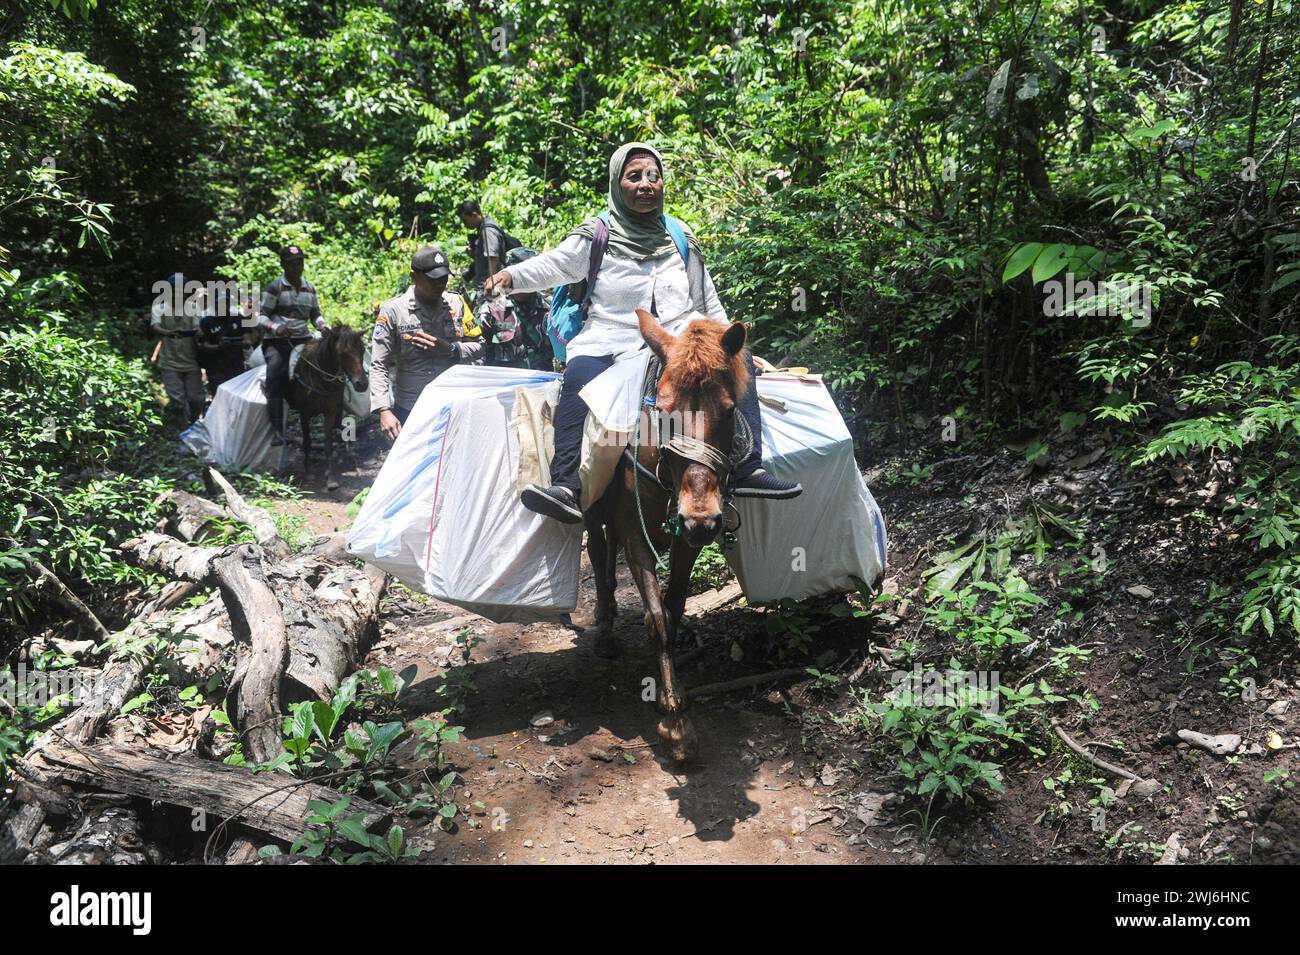 Jember, Indonesia. 13th Feb, 2024. Staff members deliver ballot boxes to remote areas on horse back at Meru Betiri National Park in Jember, East Java, Indonesia, on Feb. 13, 2024. Indonesia's 2024 presidential election will be held on Feb. 14. Credit: Sahlan Kurniawan/Xinhua/Alamy Live News Stock Photo